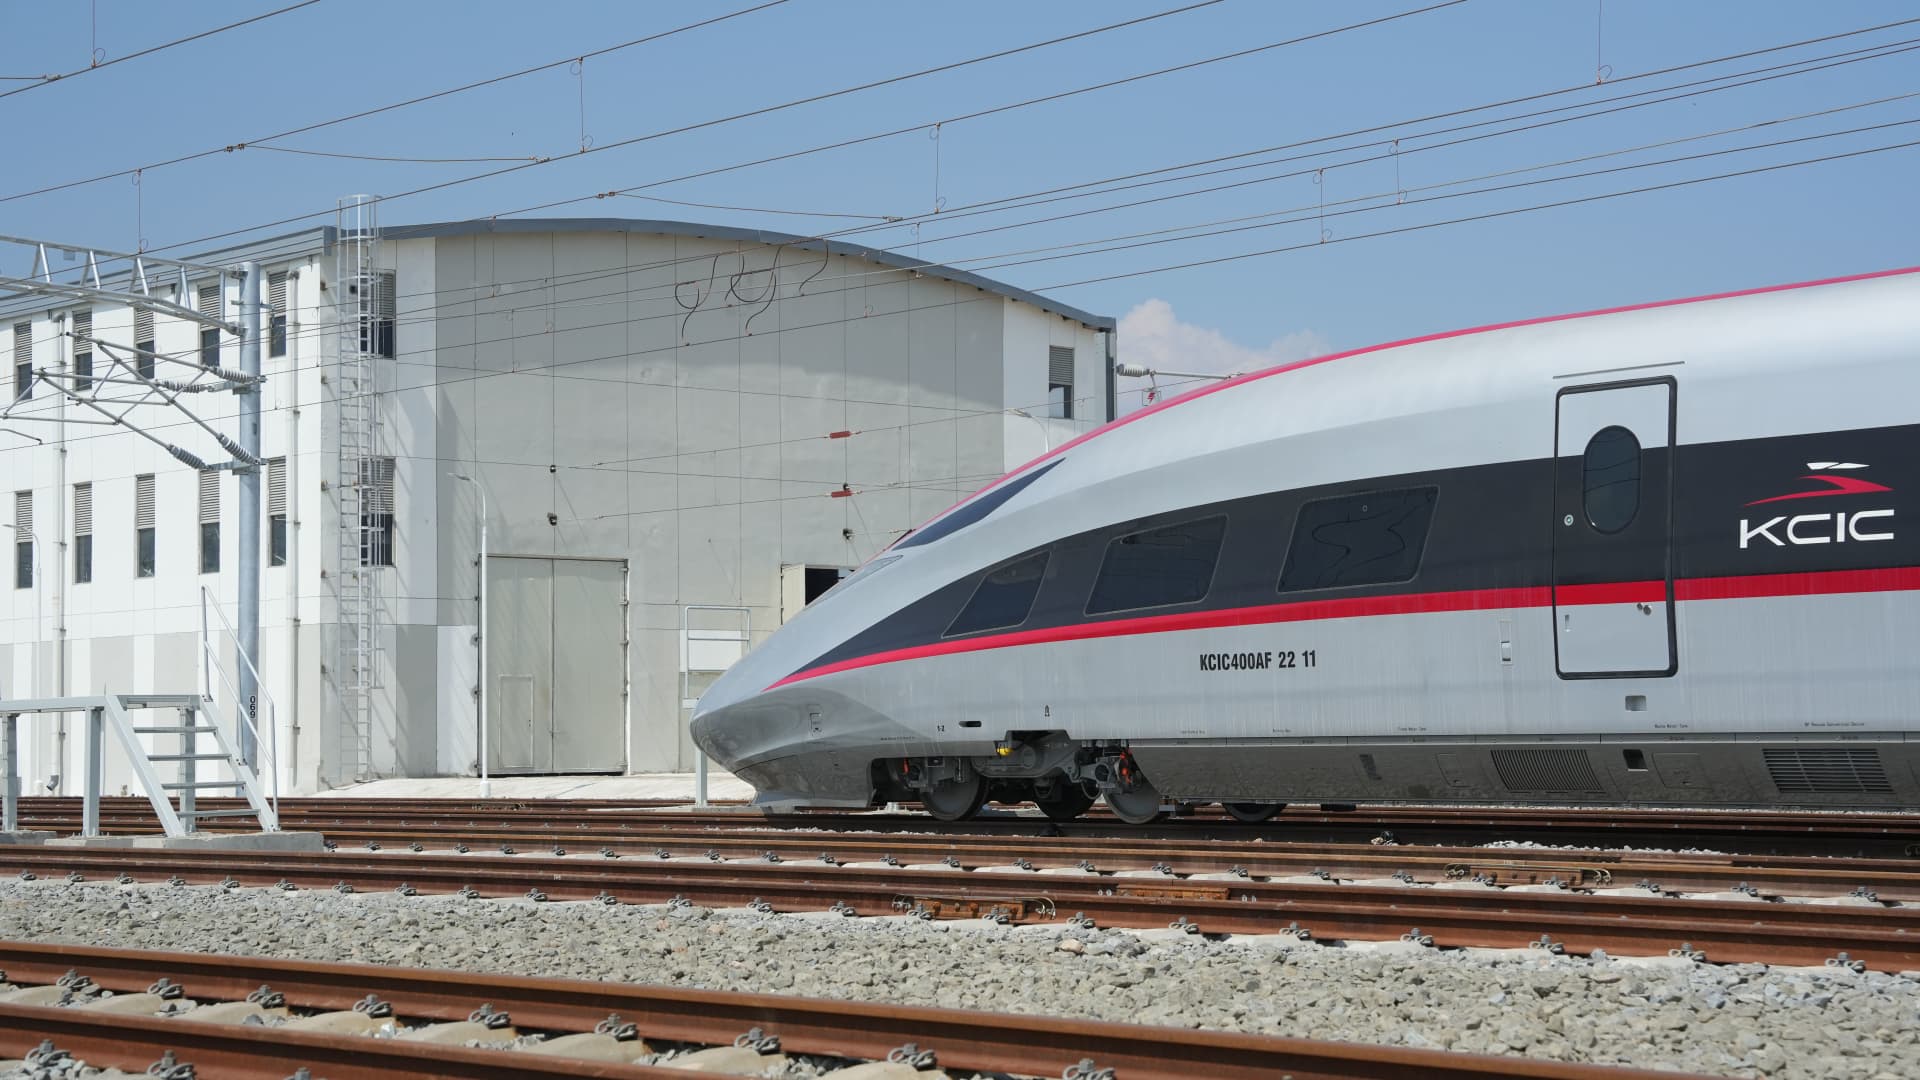 Indonesia’s China-backed high-speed train sparks concerns of debt trap